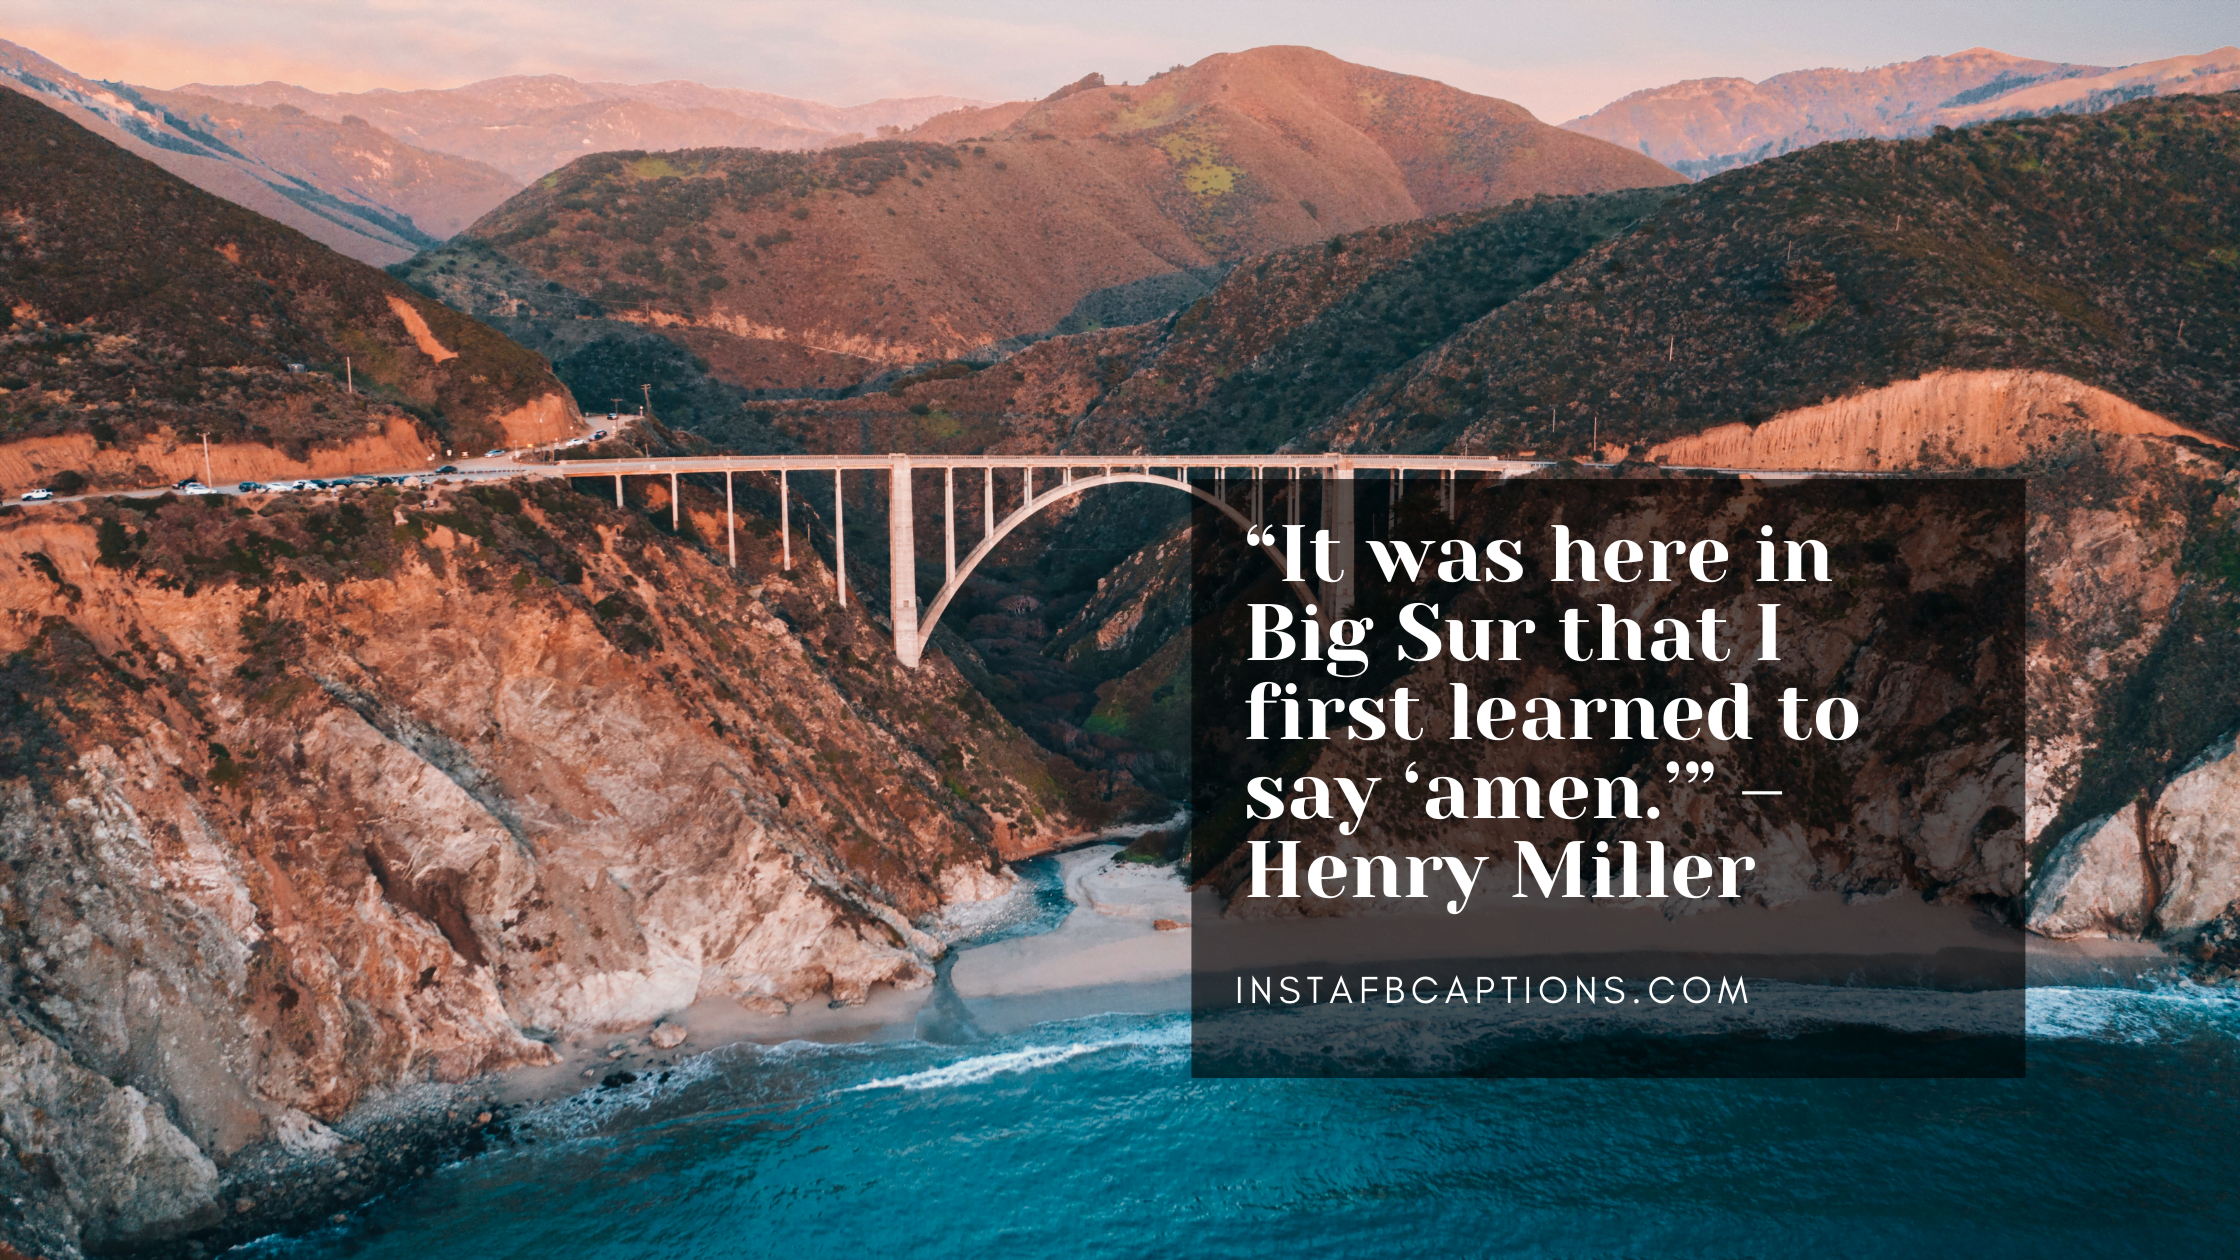 Quotes Related To Big Sur  - Quotes Related to Big Sur - 65 Big Sur Instagram Captions in 2022